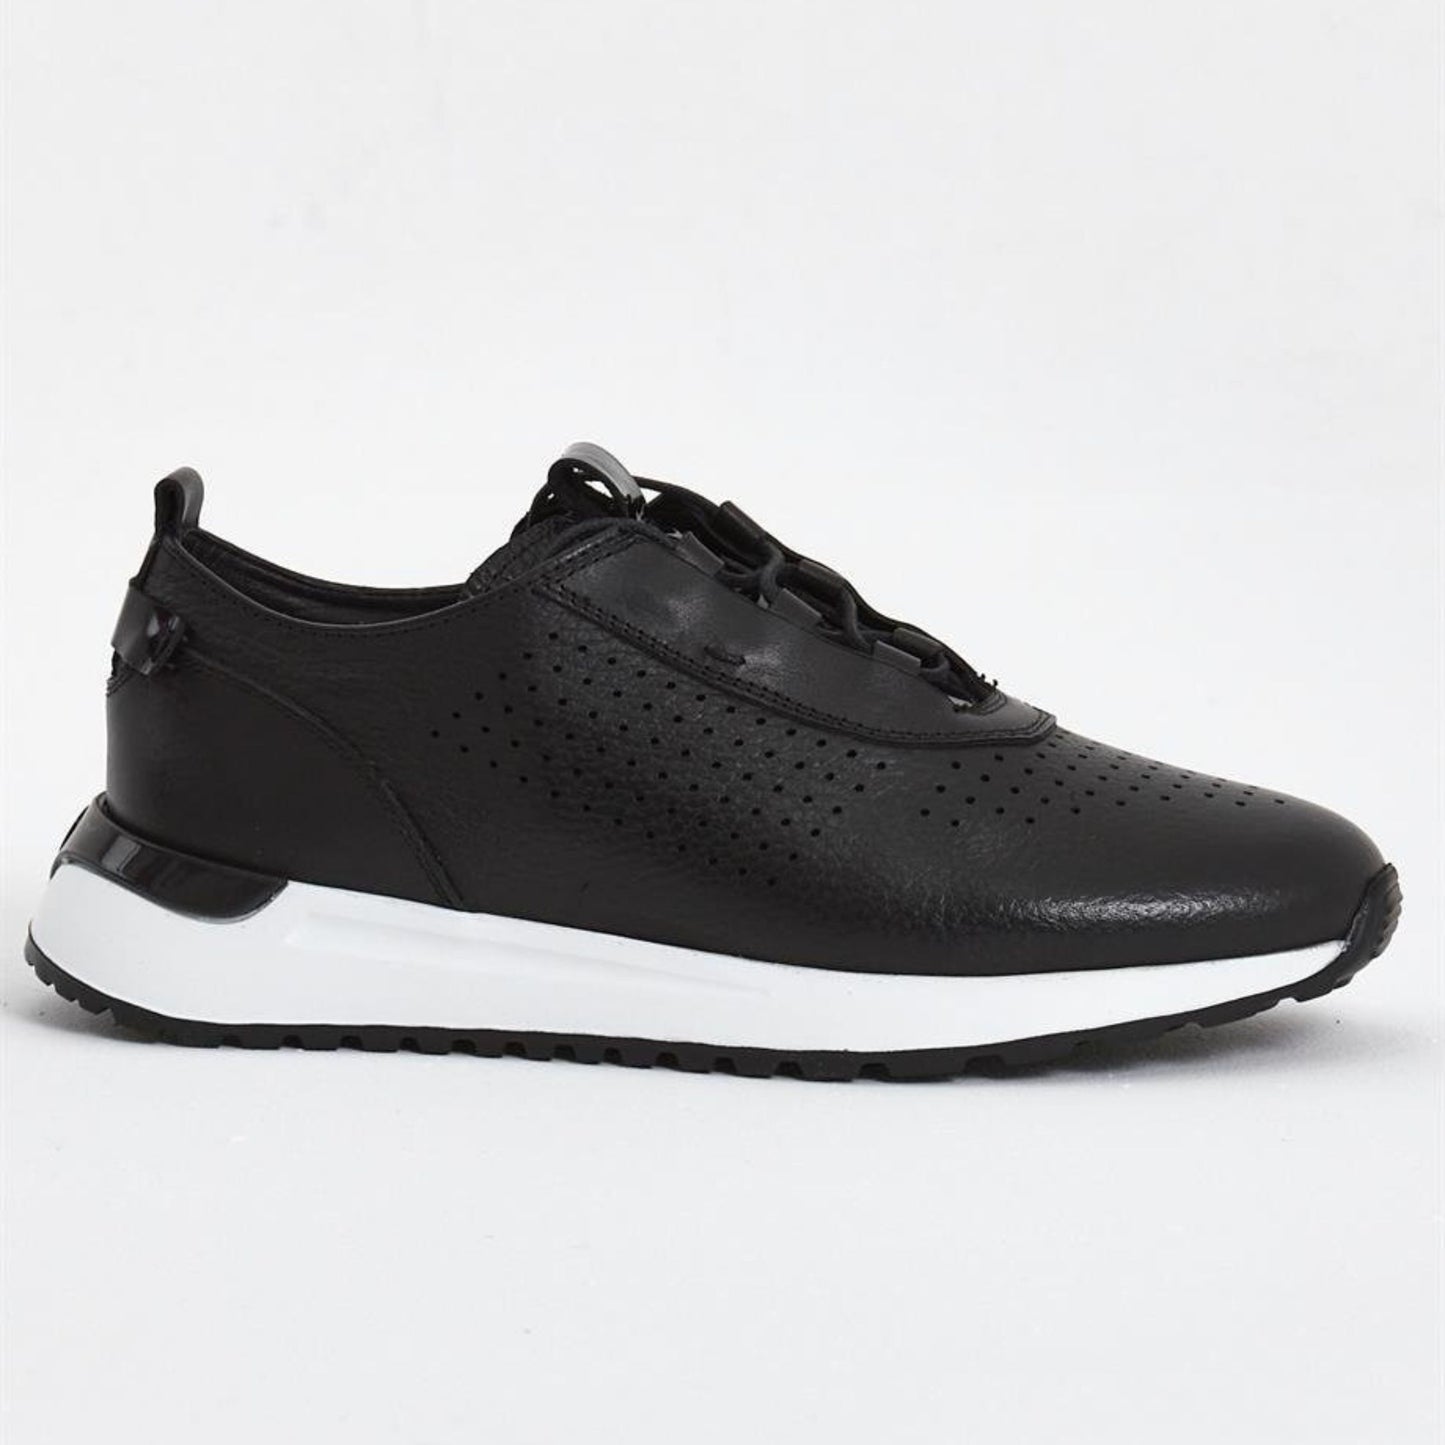 Madasat Black Casual Shoes - 715 |